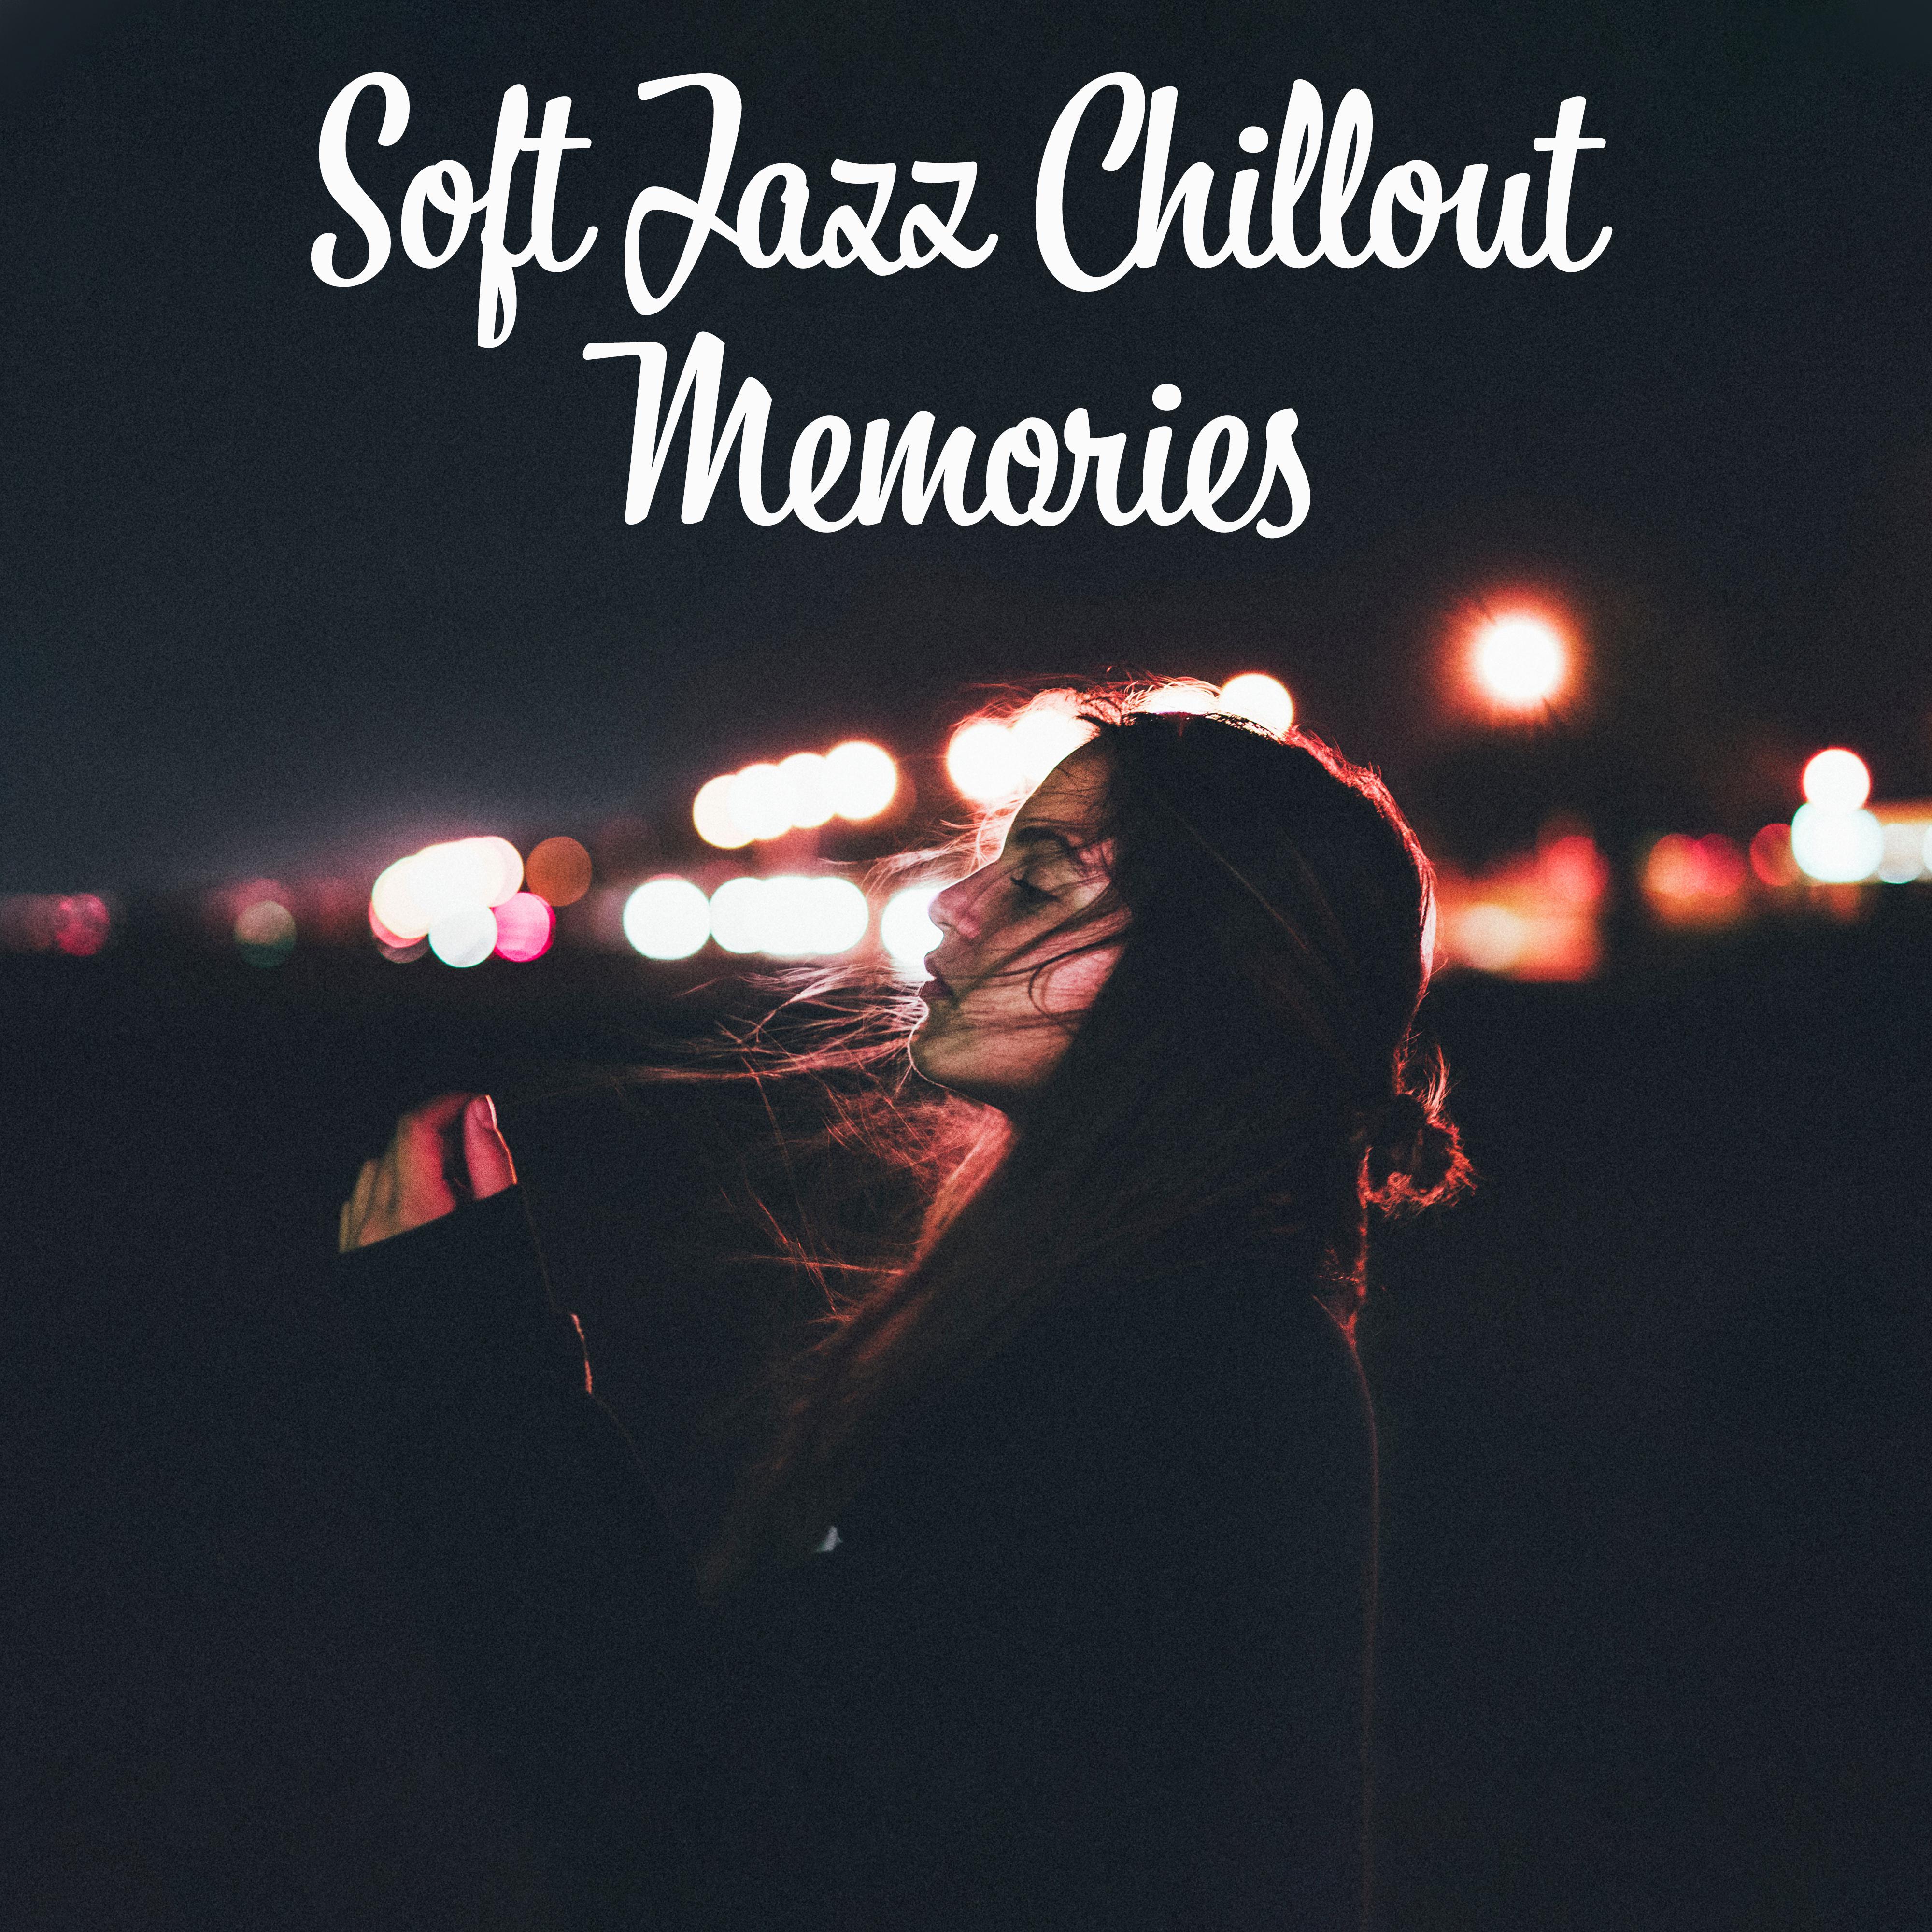 Soft Jazz Chillout Memories  2019 Smooth Jazz Songs for Nice Time Spending with Family  Friends